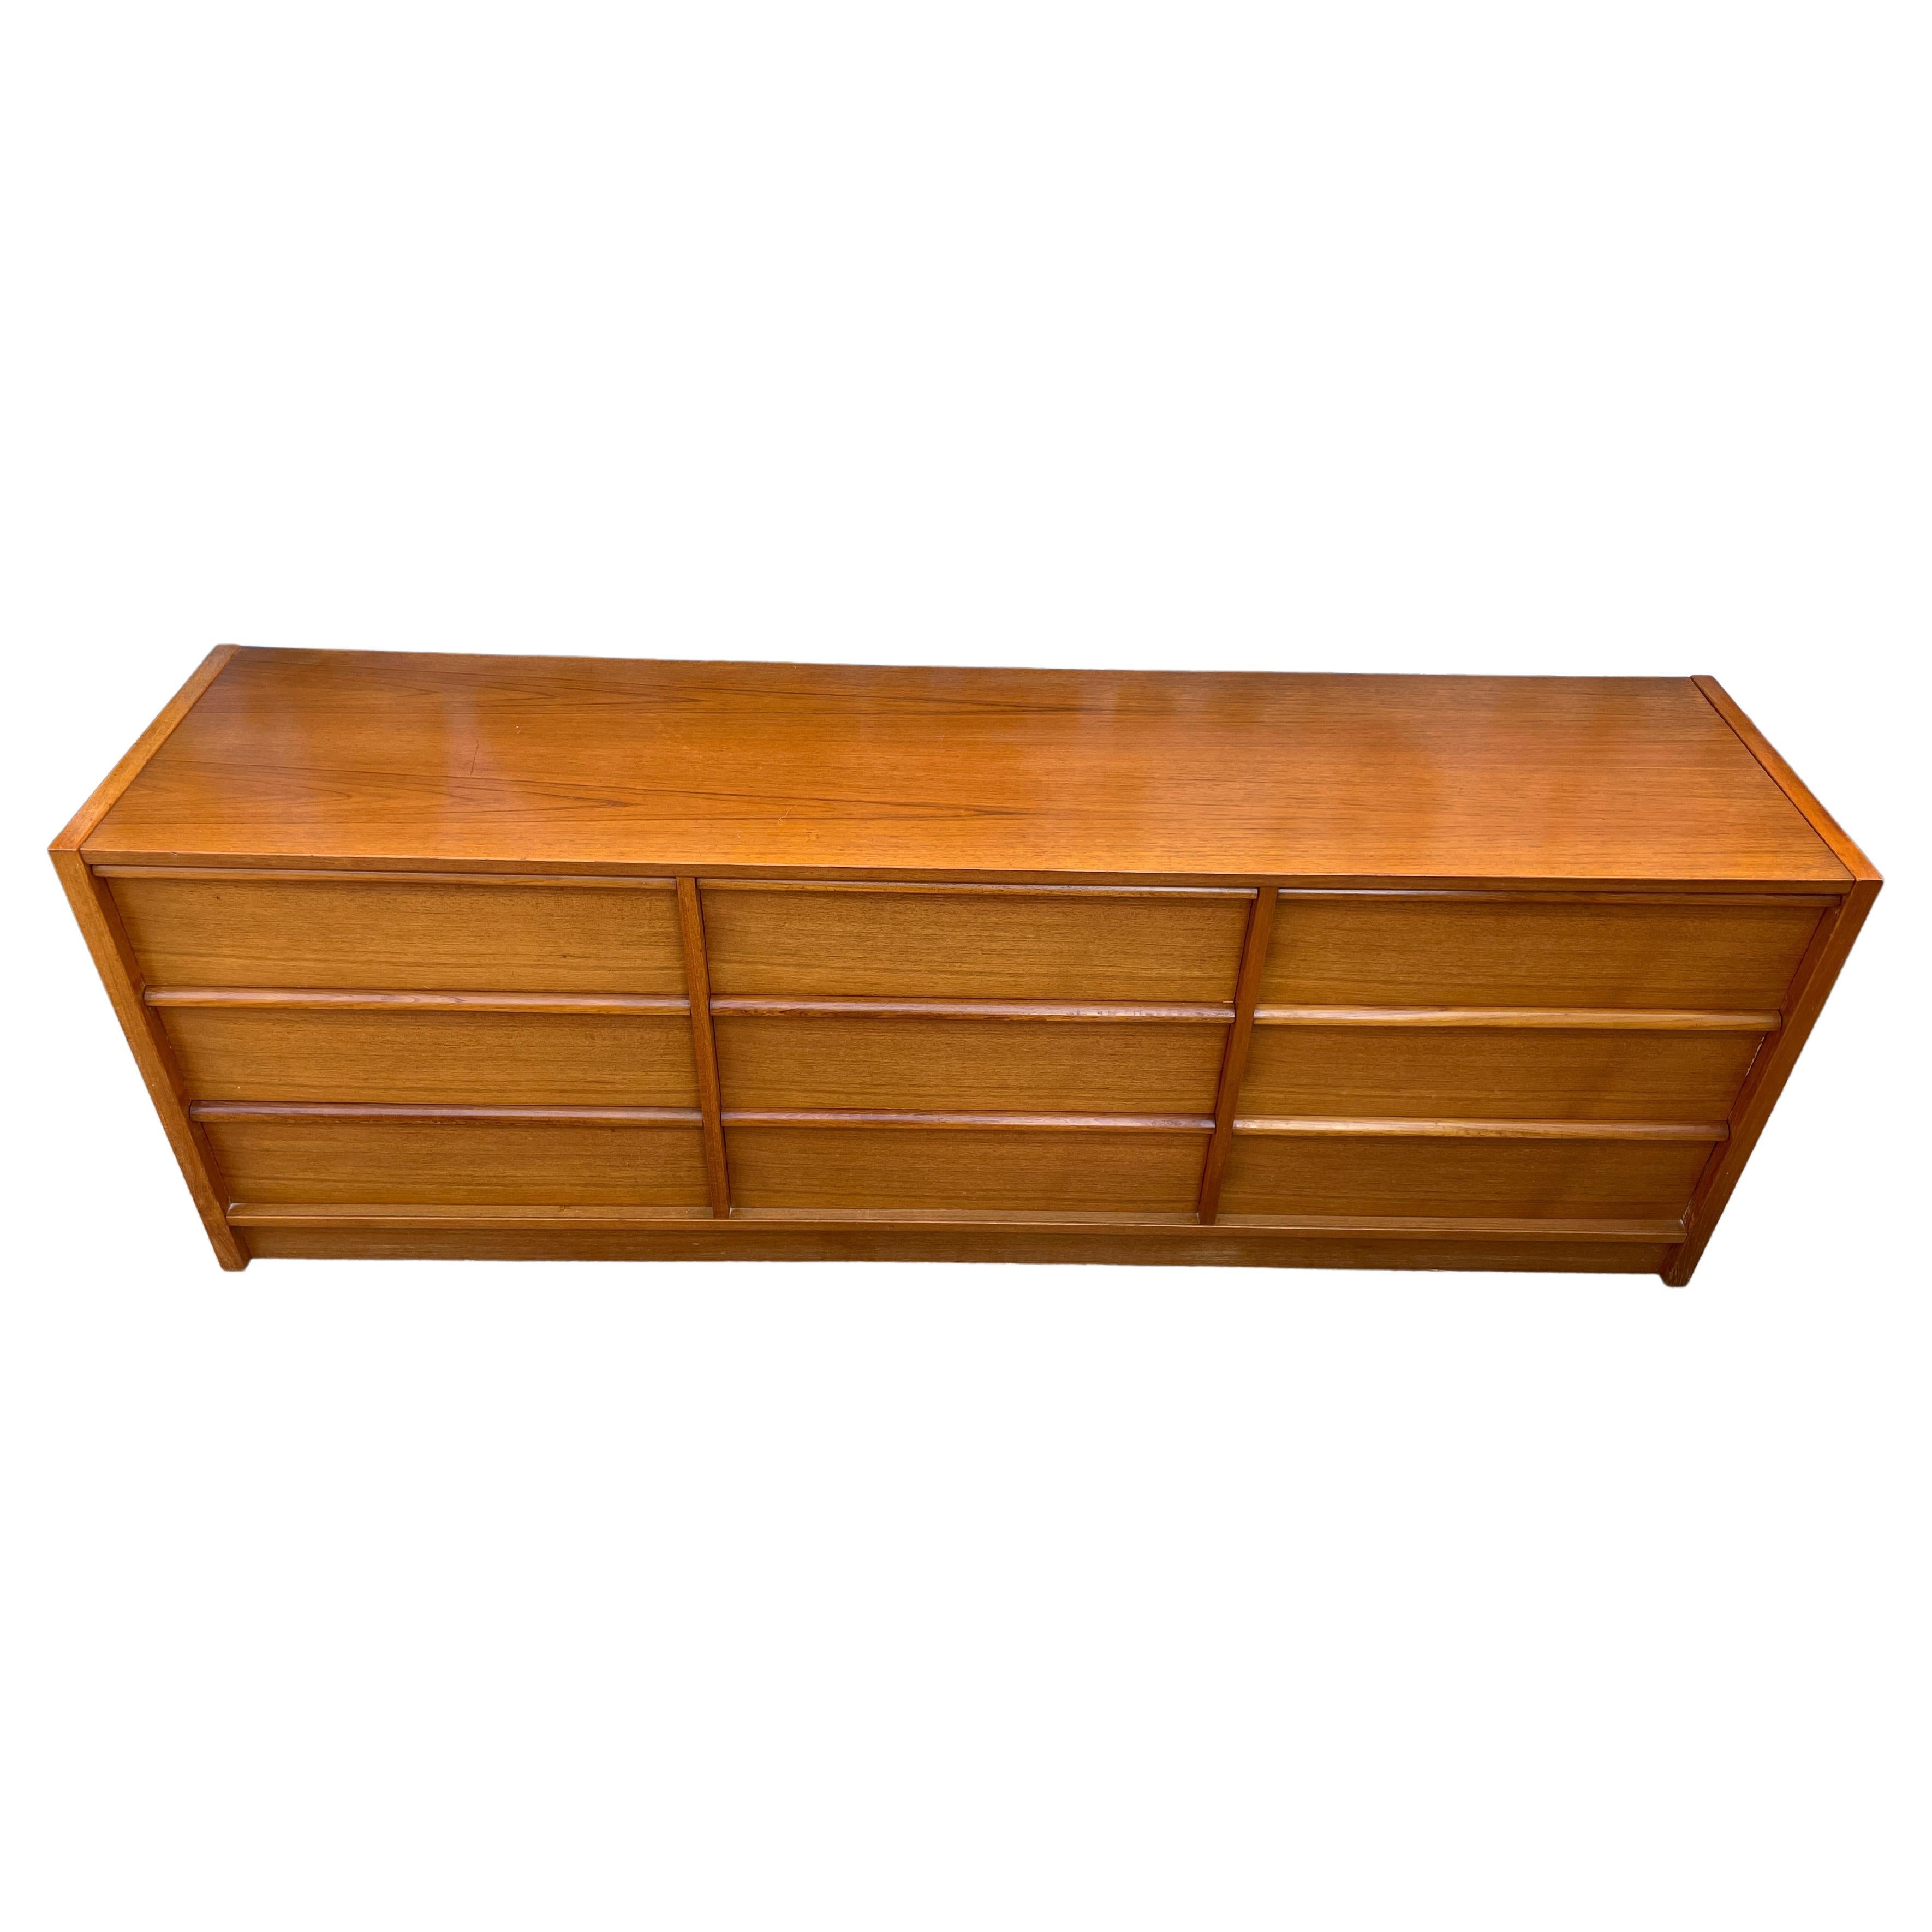 Very clean mid-century Danish modern long and low teak 9 drawer credenza or dresser. All drawers slide smooth. Beautiful teak grain. Very clean inside and out. Dovetail joints on drawers. Made In Denmark labeled. Located in Brooklyn NYC.

Measures